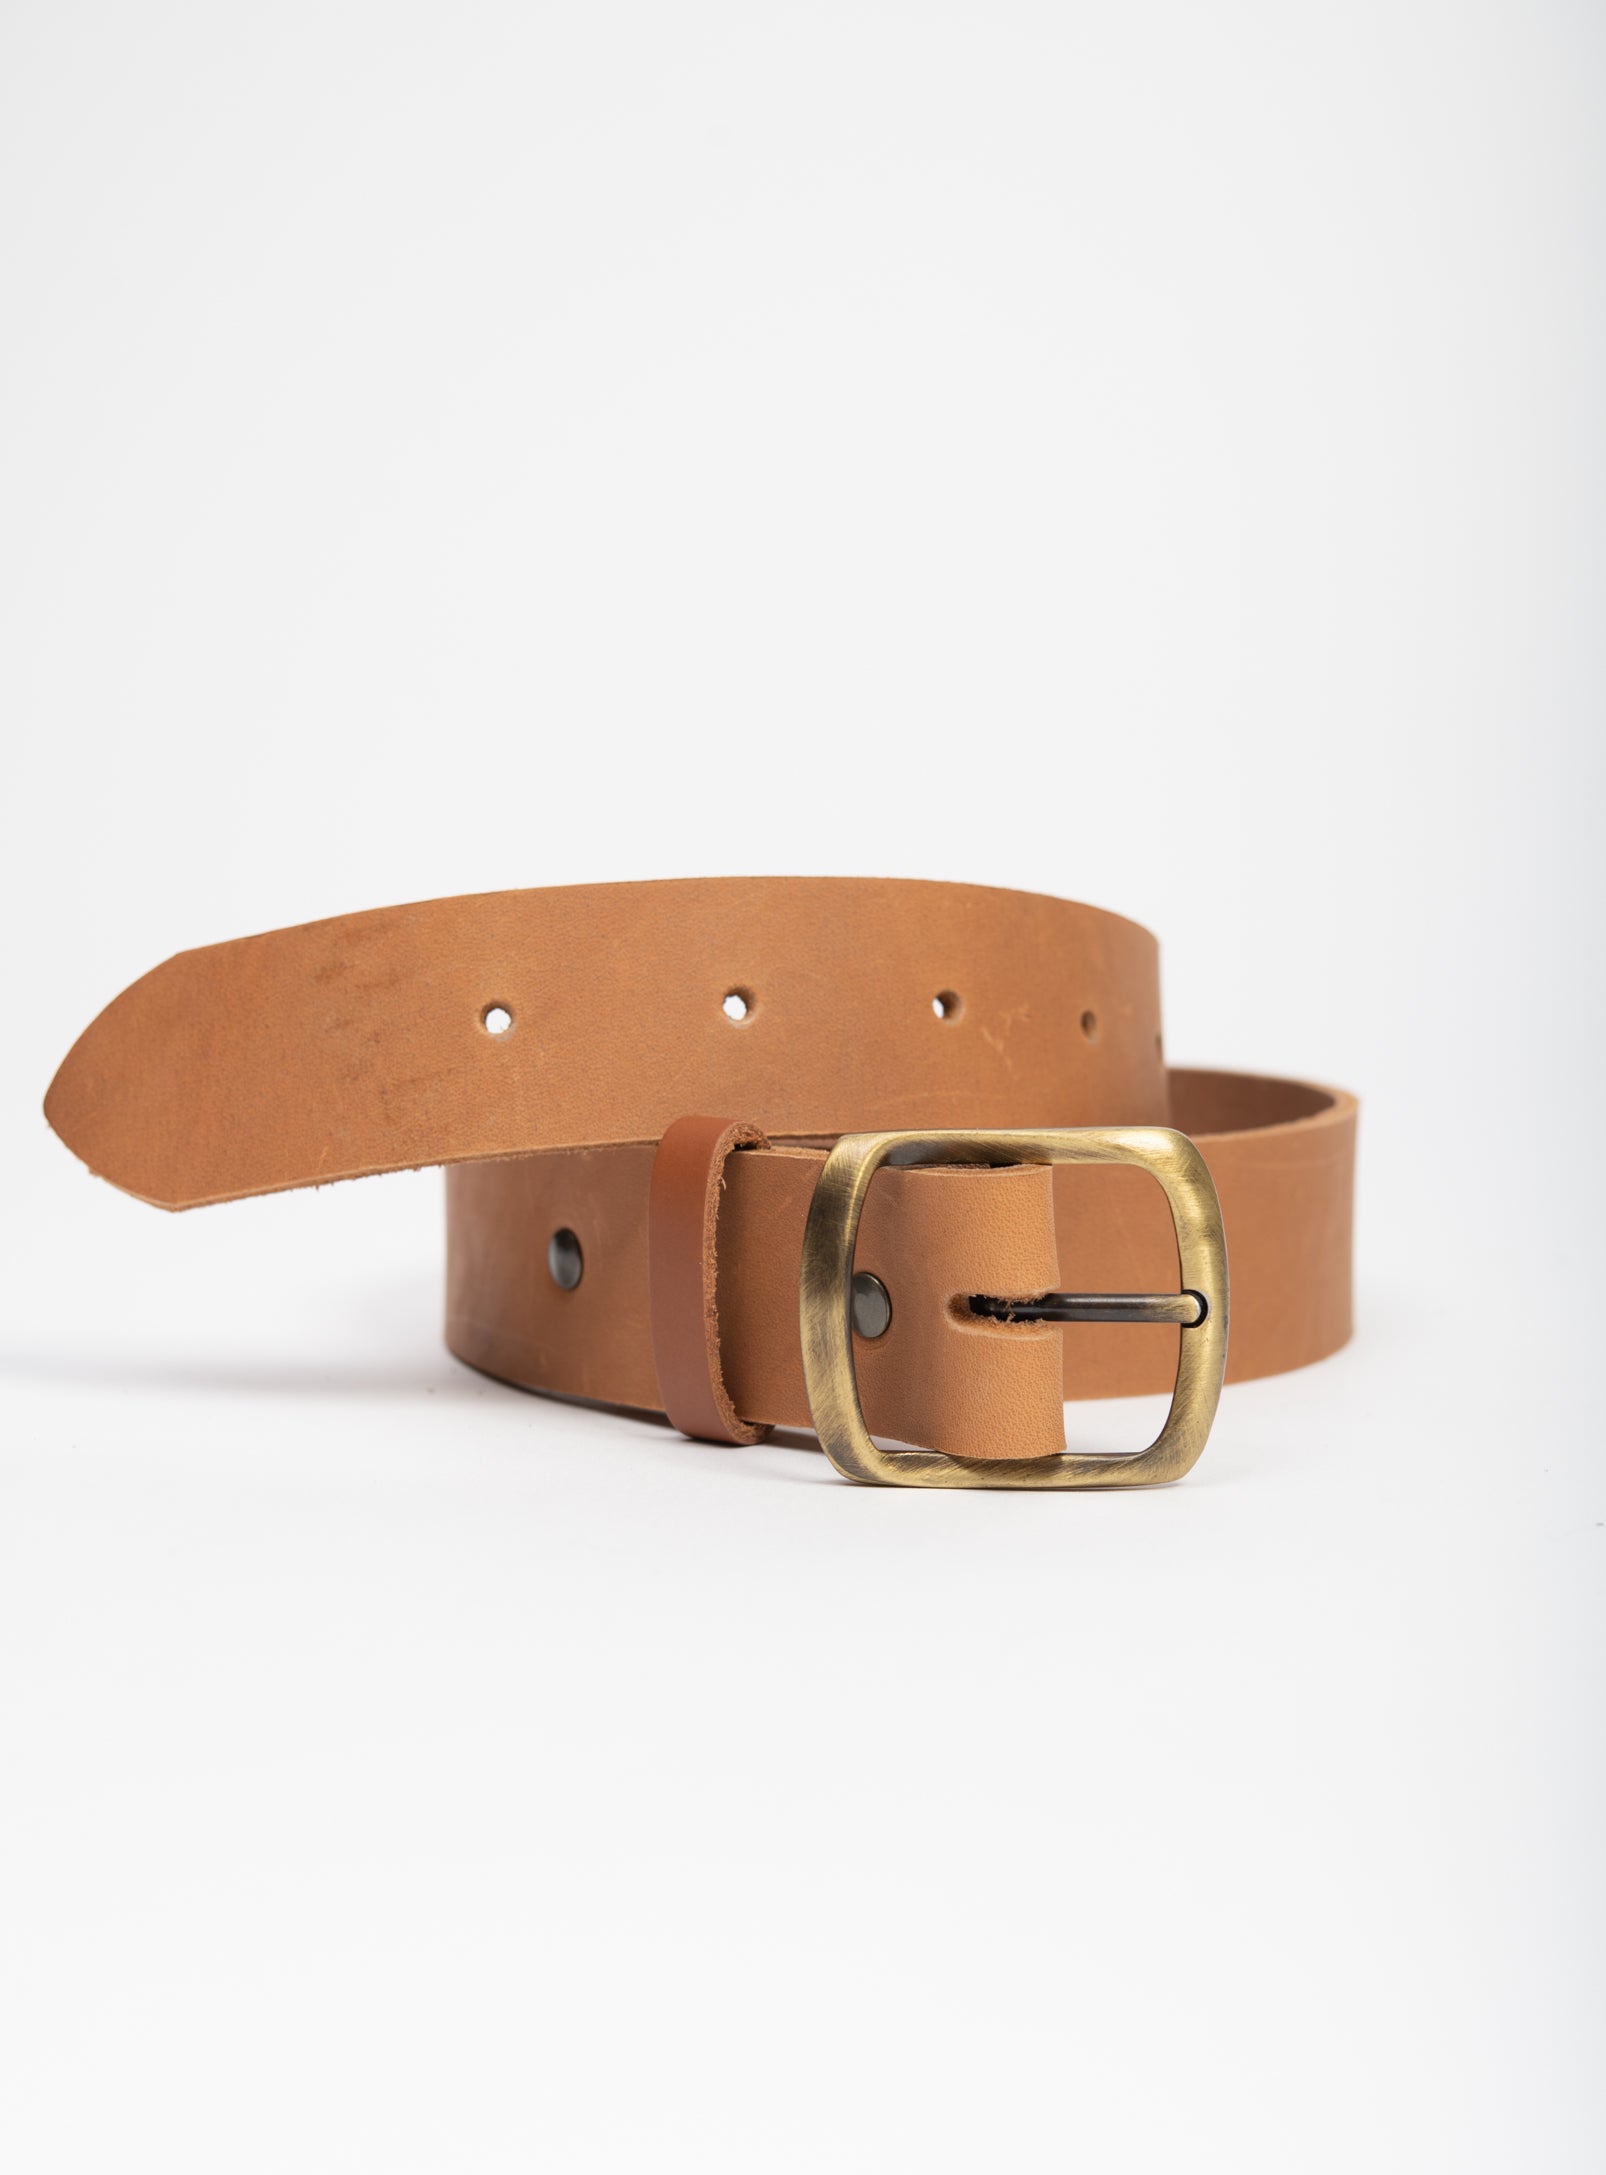 Womens Tan Leather Belt With Brushed Gold Buckle - Belt Designs